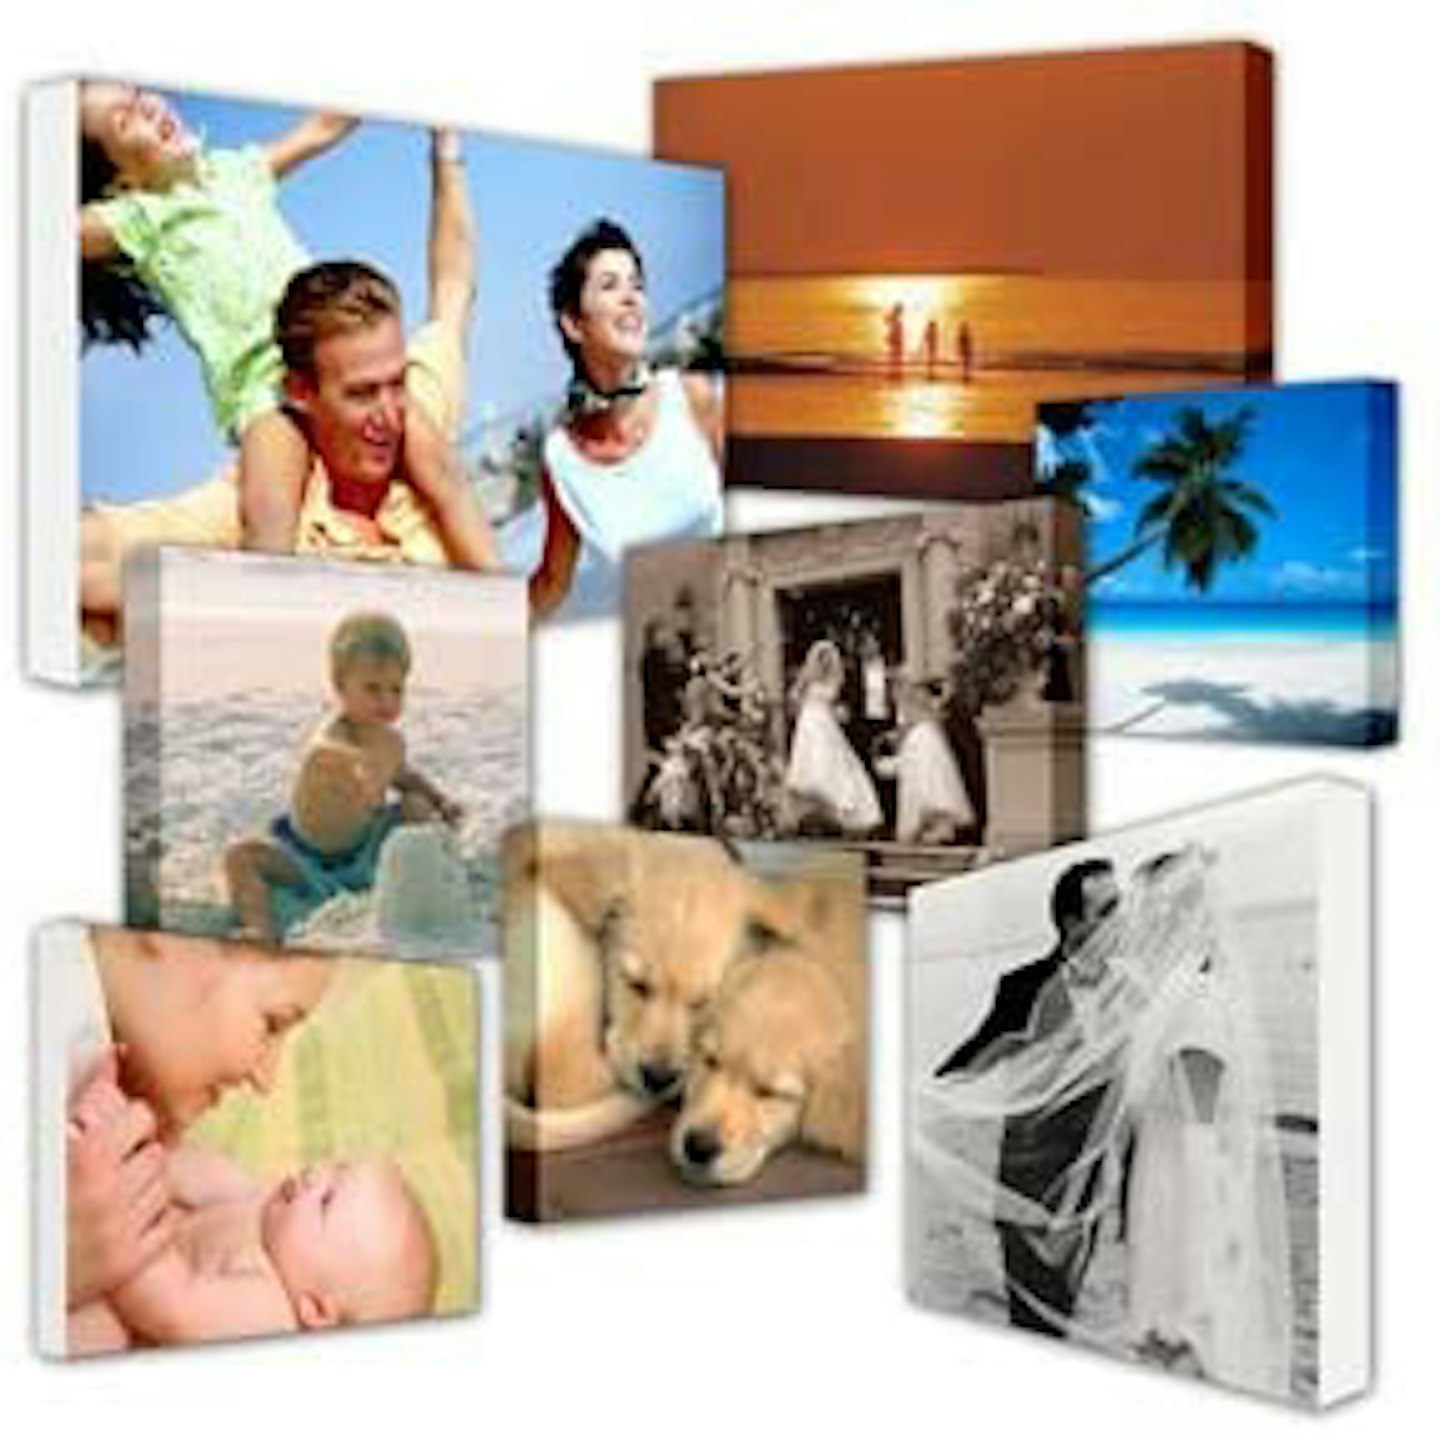 Your My Photo Picture On Personalised Wall Canvas A4 12"x8" inch 8x12 BOX FRAMED